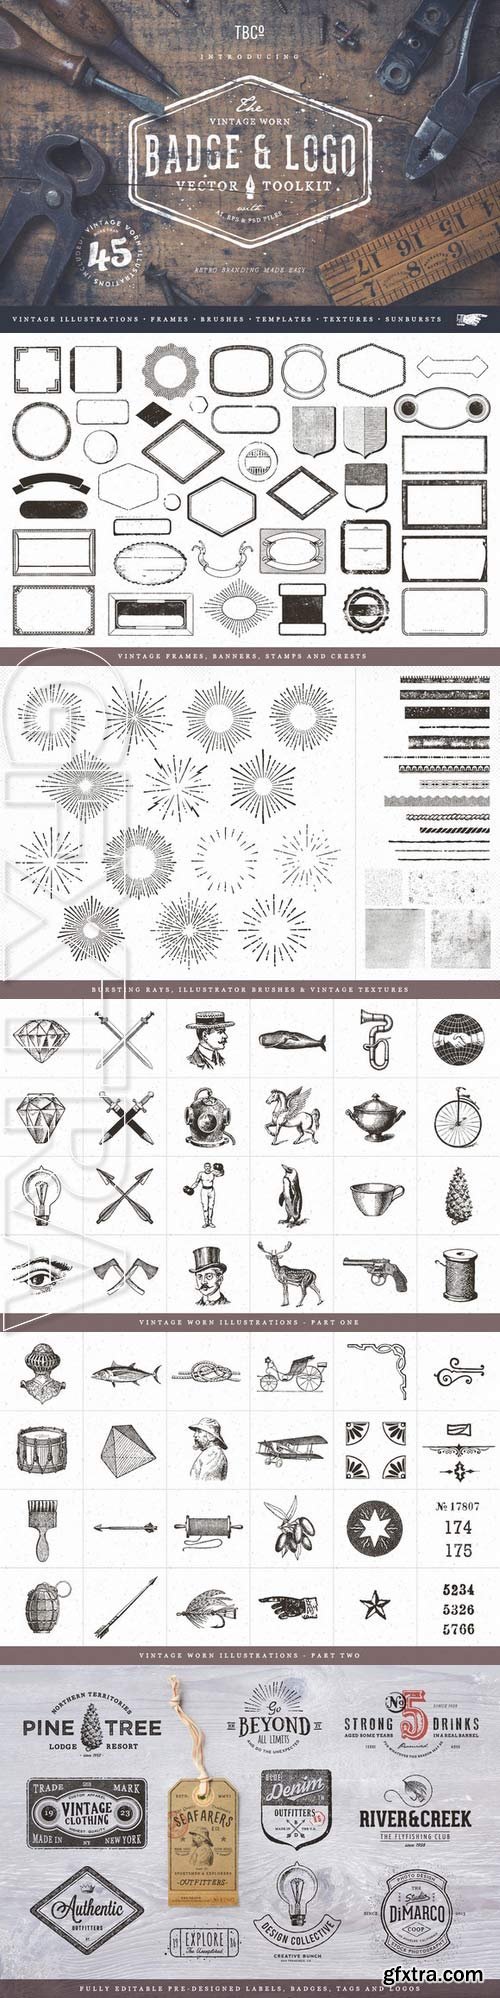 CM - Vintage Badge and Logo Toolkit 339492